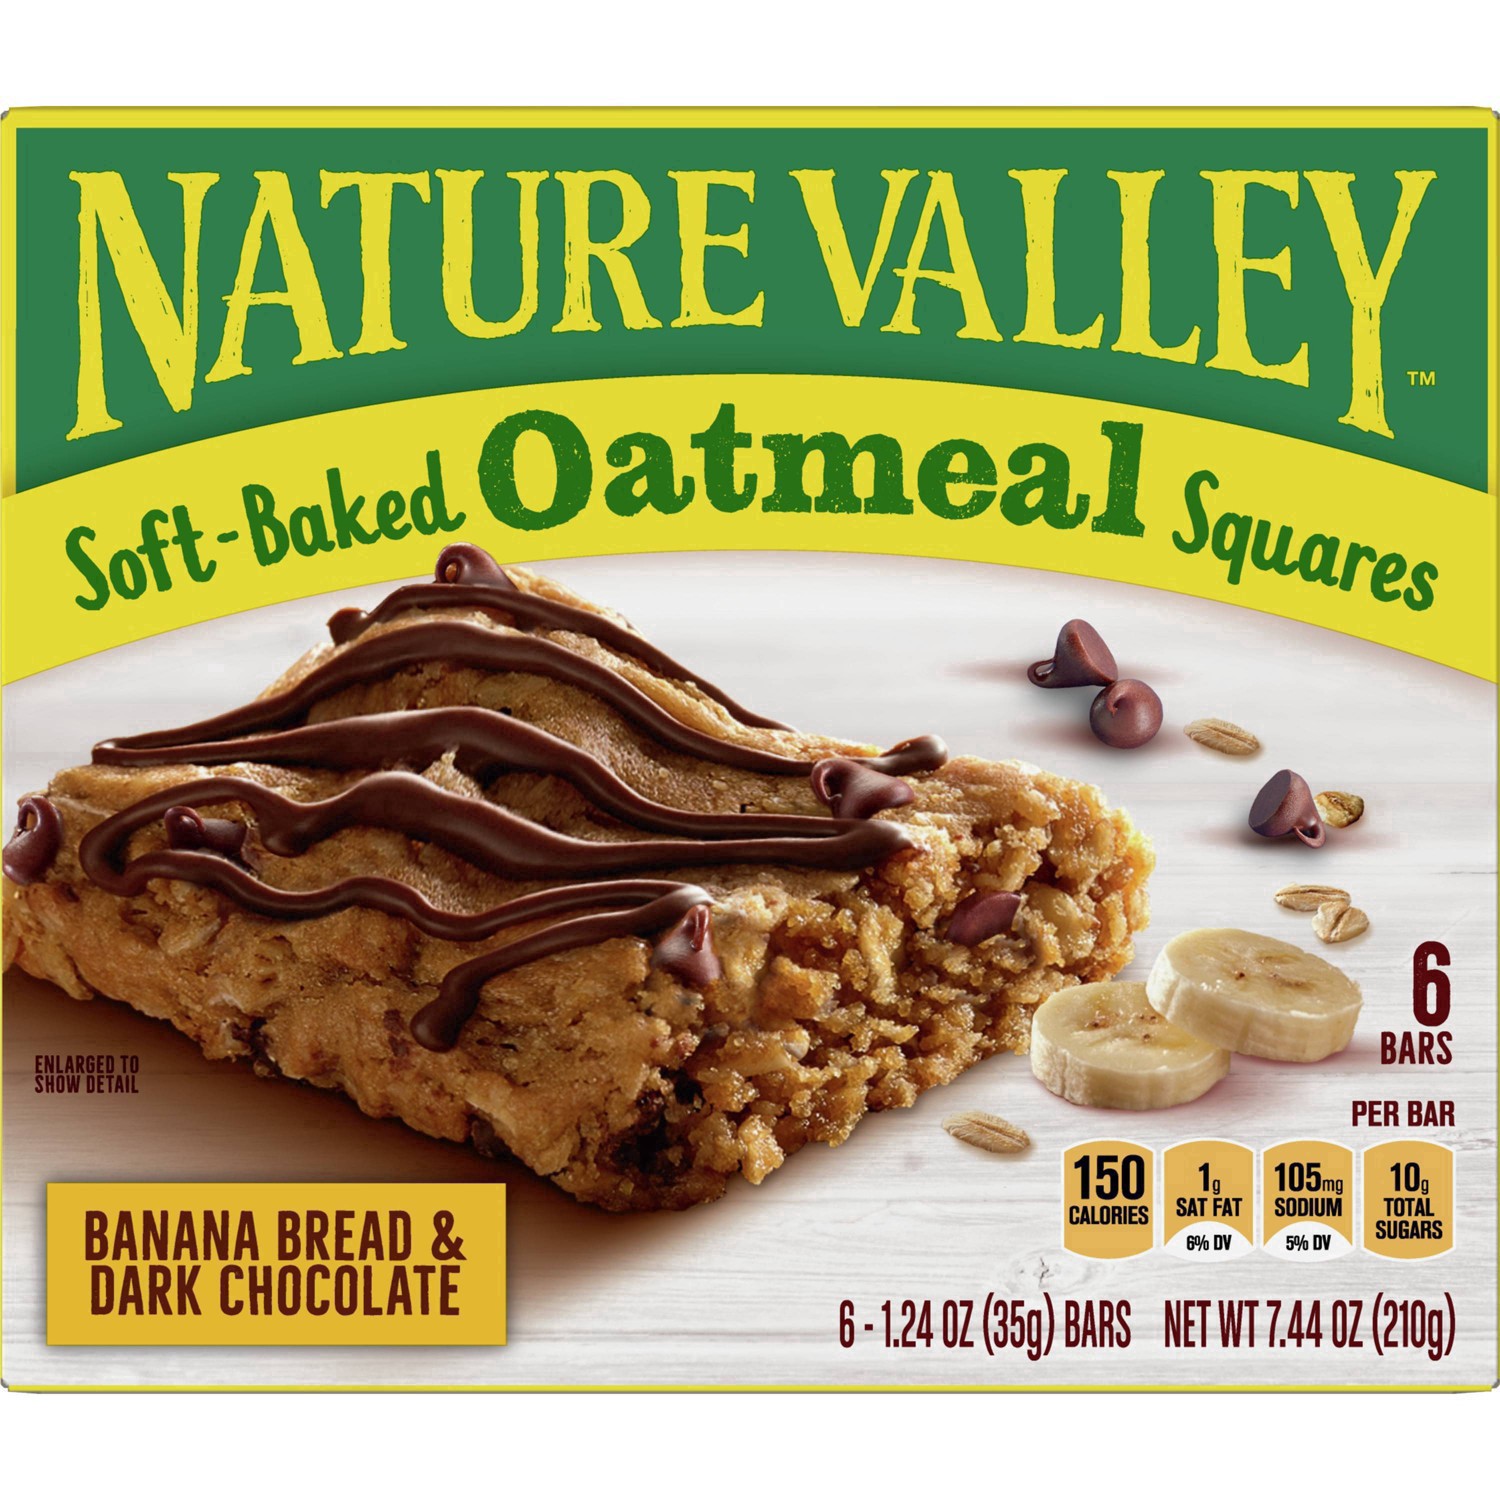 slide 58 of 101, Nature Valley Soft-Baked Oatmeal Squares, Banana Bread & Dark Chocolate, 6 ct, 6 ct